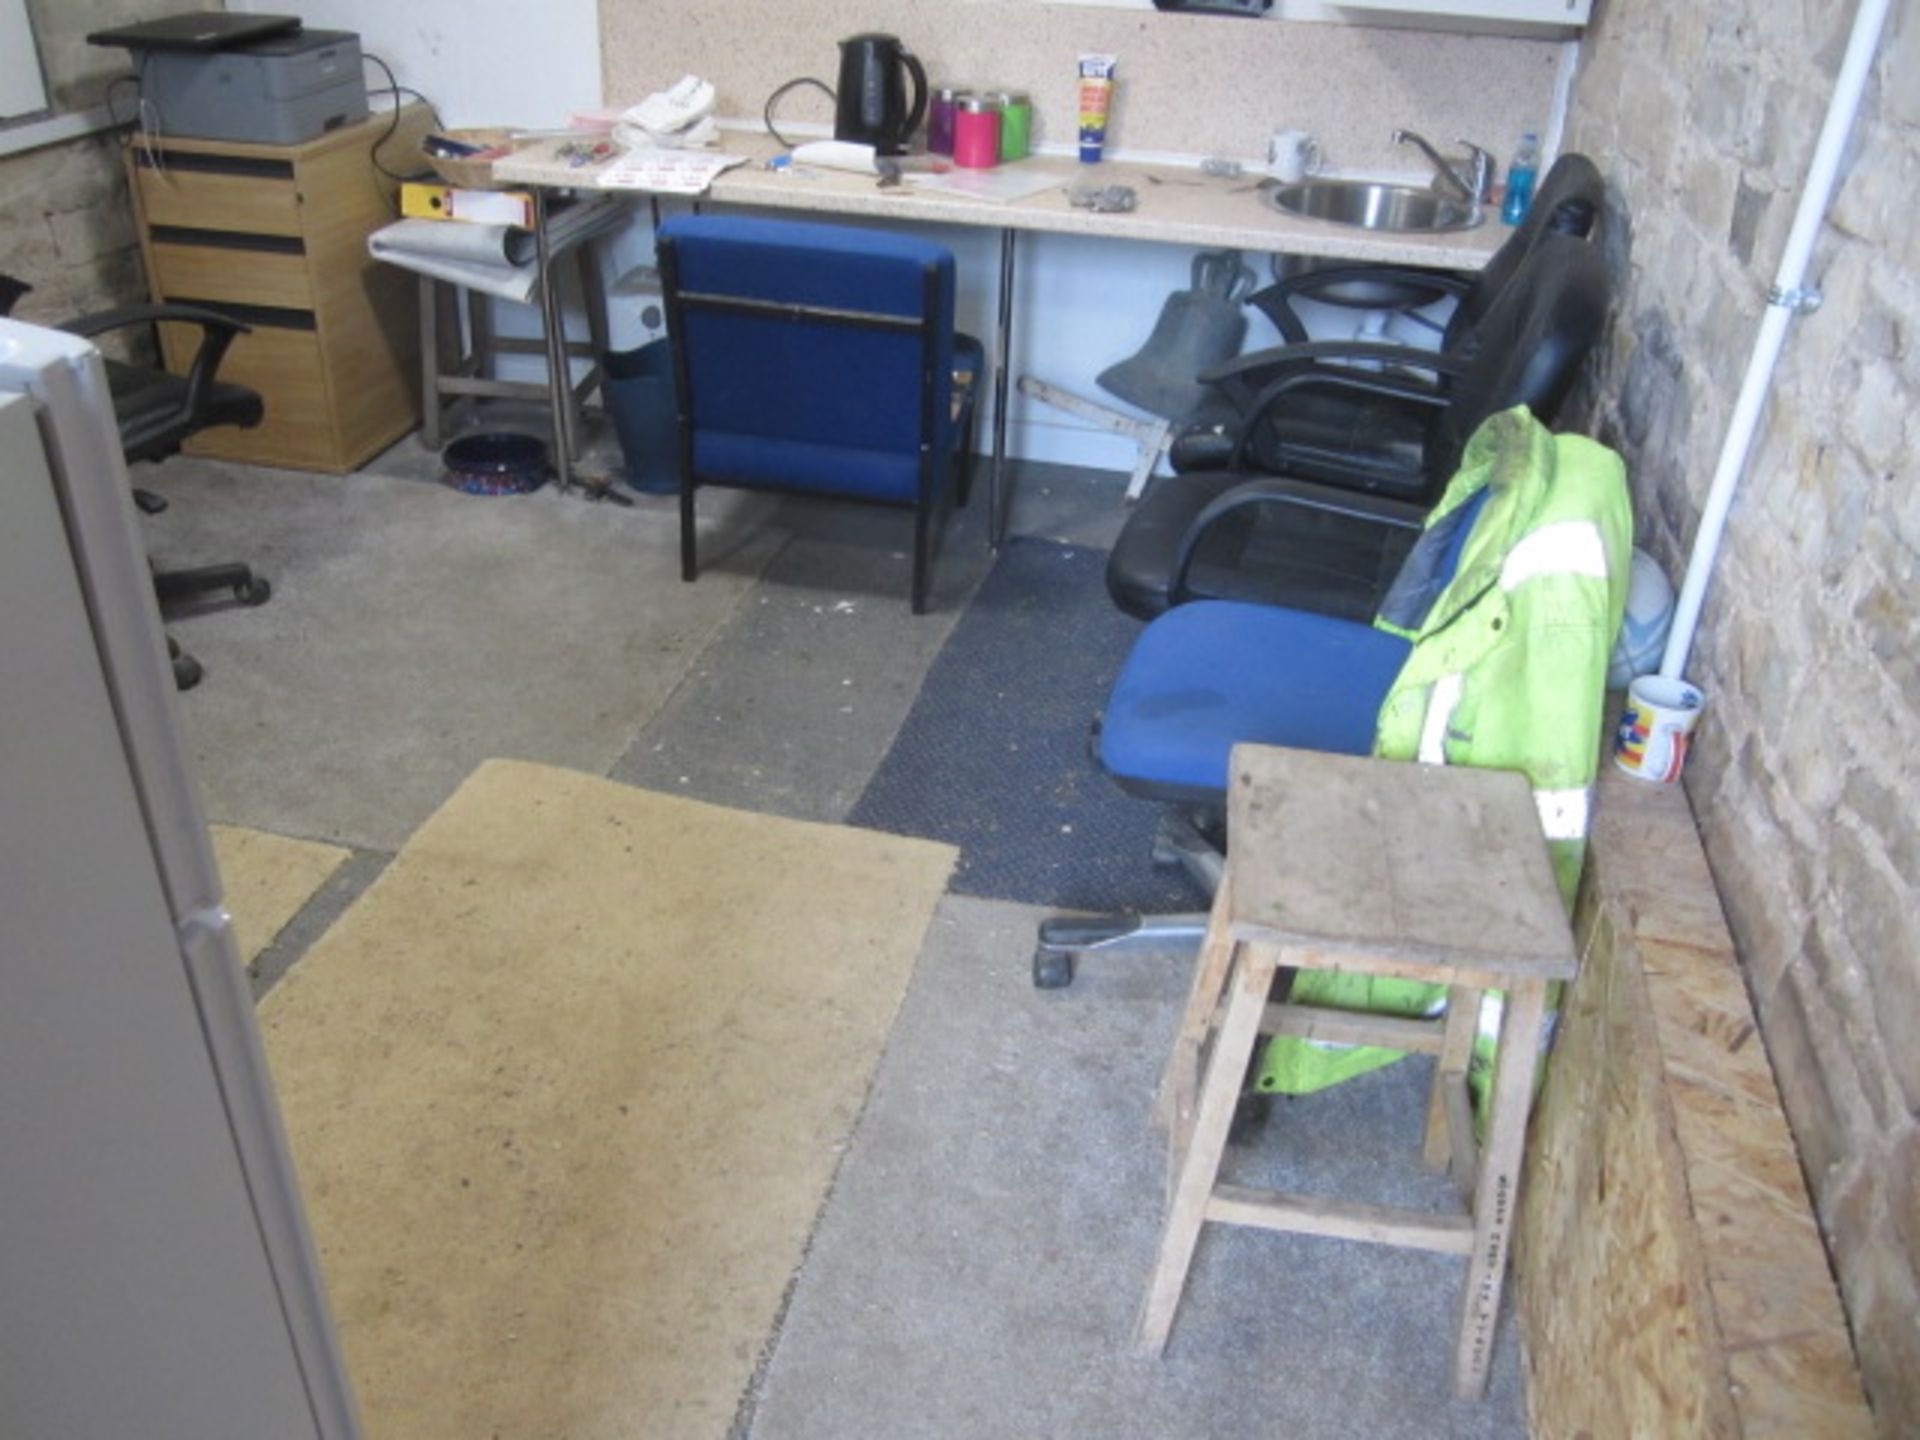 Remaining loose contents of office including 6 x assorted chairs, 3/4 height fridge freezer,